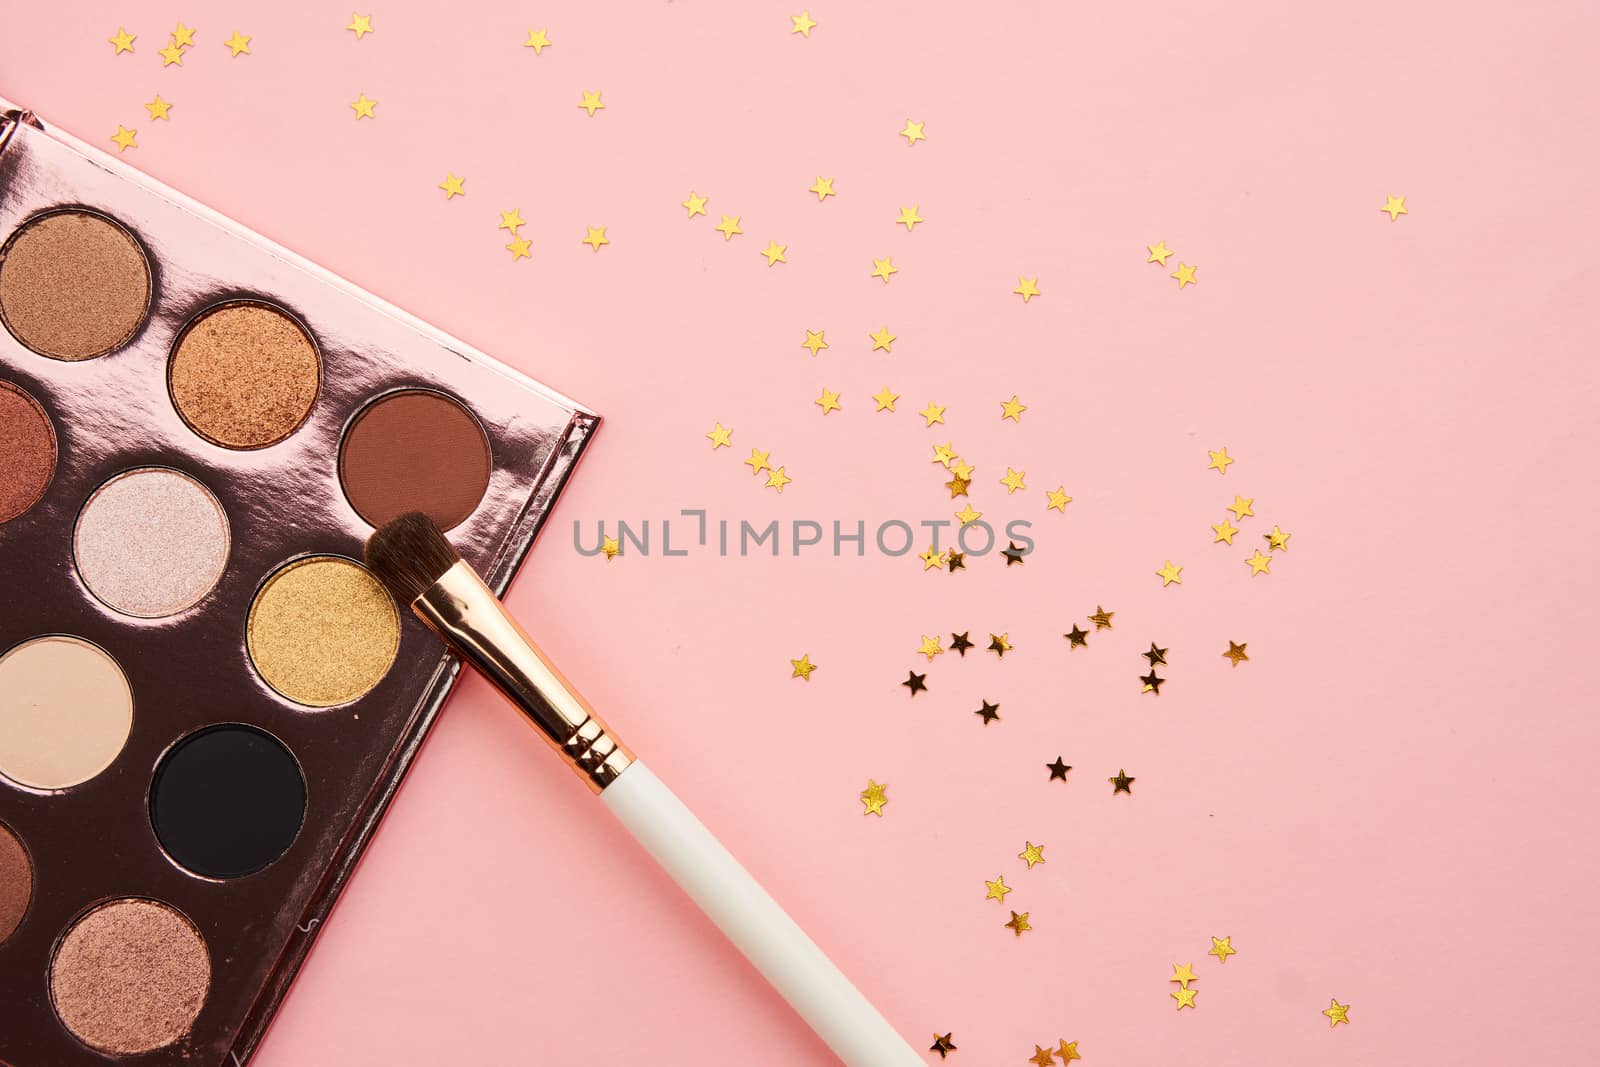 Eyeshadows and makeup brushes on a pink background Copy Space top view. High quality photo